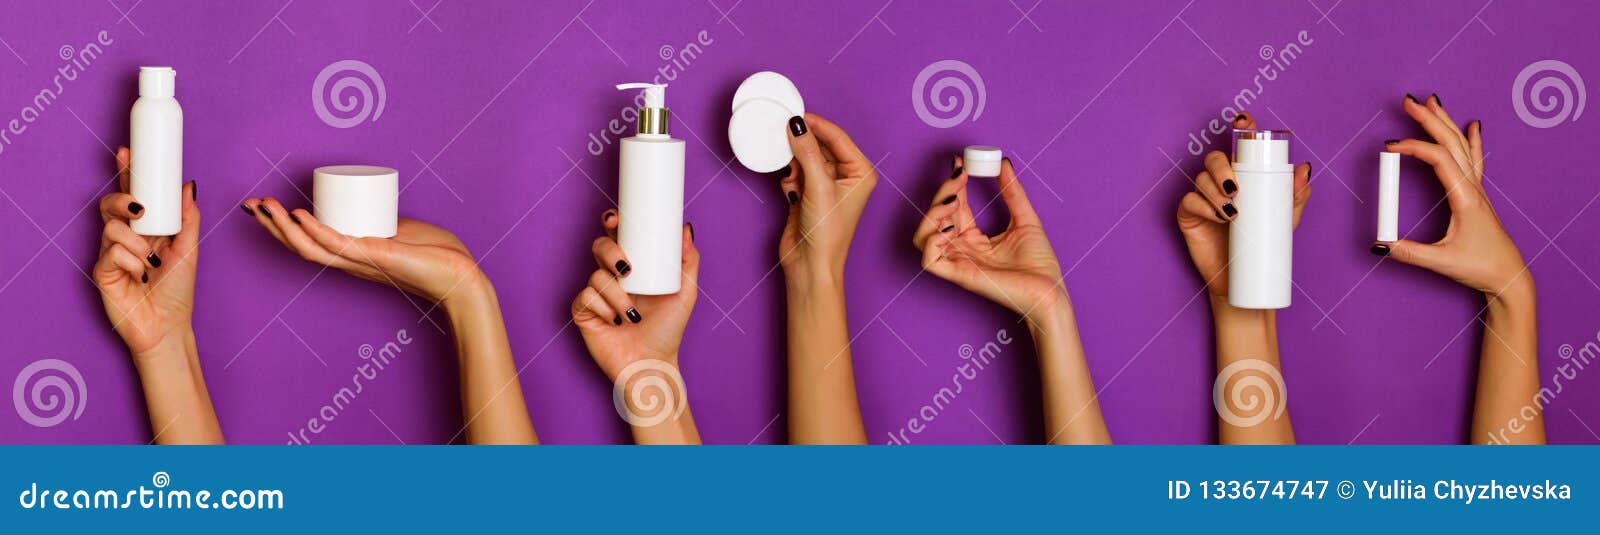 female hands holding white cosmetics bottles - lotion, cream, serum on violet background. banner. skin care, pure beauty, body